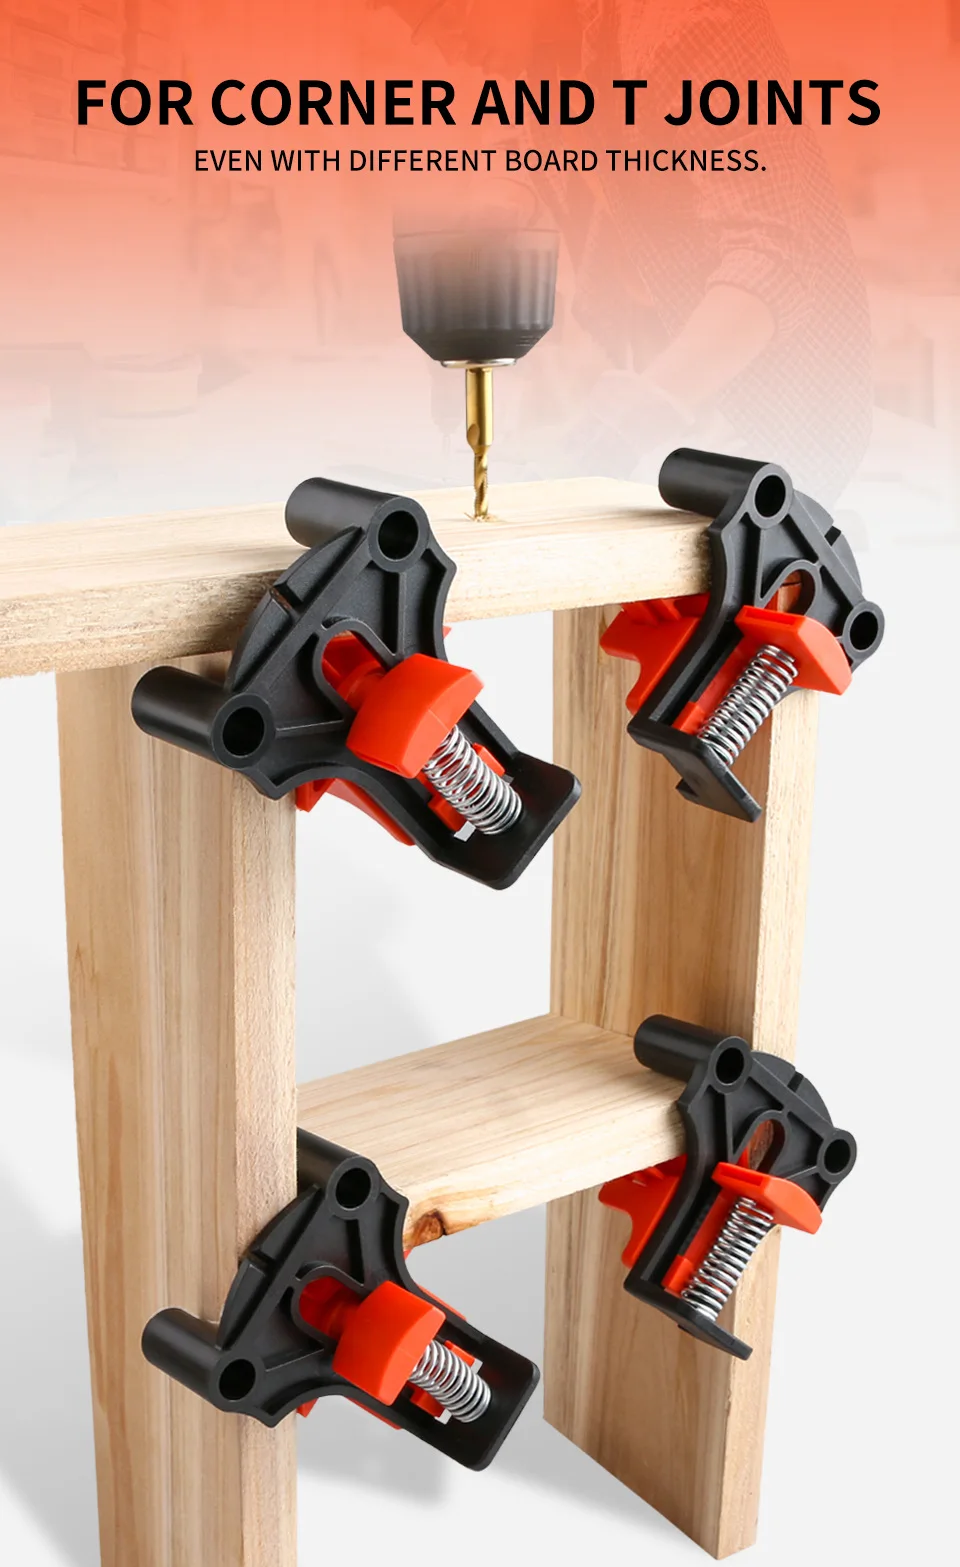 3 Metal Face Clamp Woodworking - (Pack of 2) Heavy Duty C-Type Wood Clamps  Clamping Tools with Ergonomic Grip for DIY, Pocket Hole Joinery